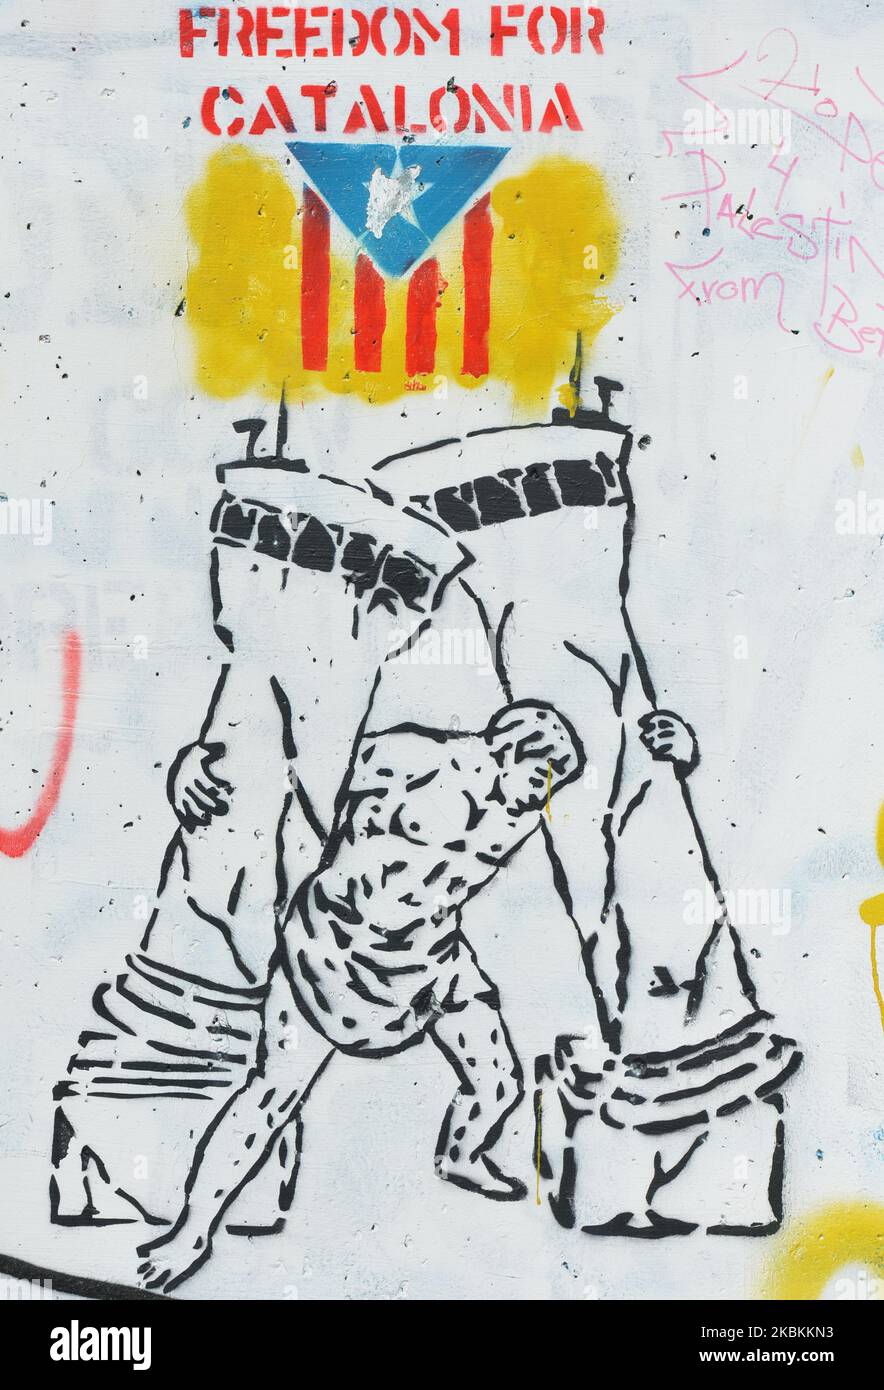 Freedom For Catalonia graffiti among other Political and social mural paintings and graffitis on the wall separting Israel and the West Bank in Bethlehem. On Thursday, March 5, 2020, in Bethlehem, Palestine (Photo by Artur Widak/NurPhoto) Stock Photo